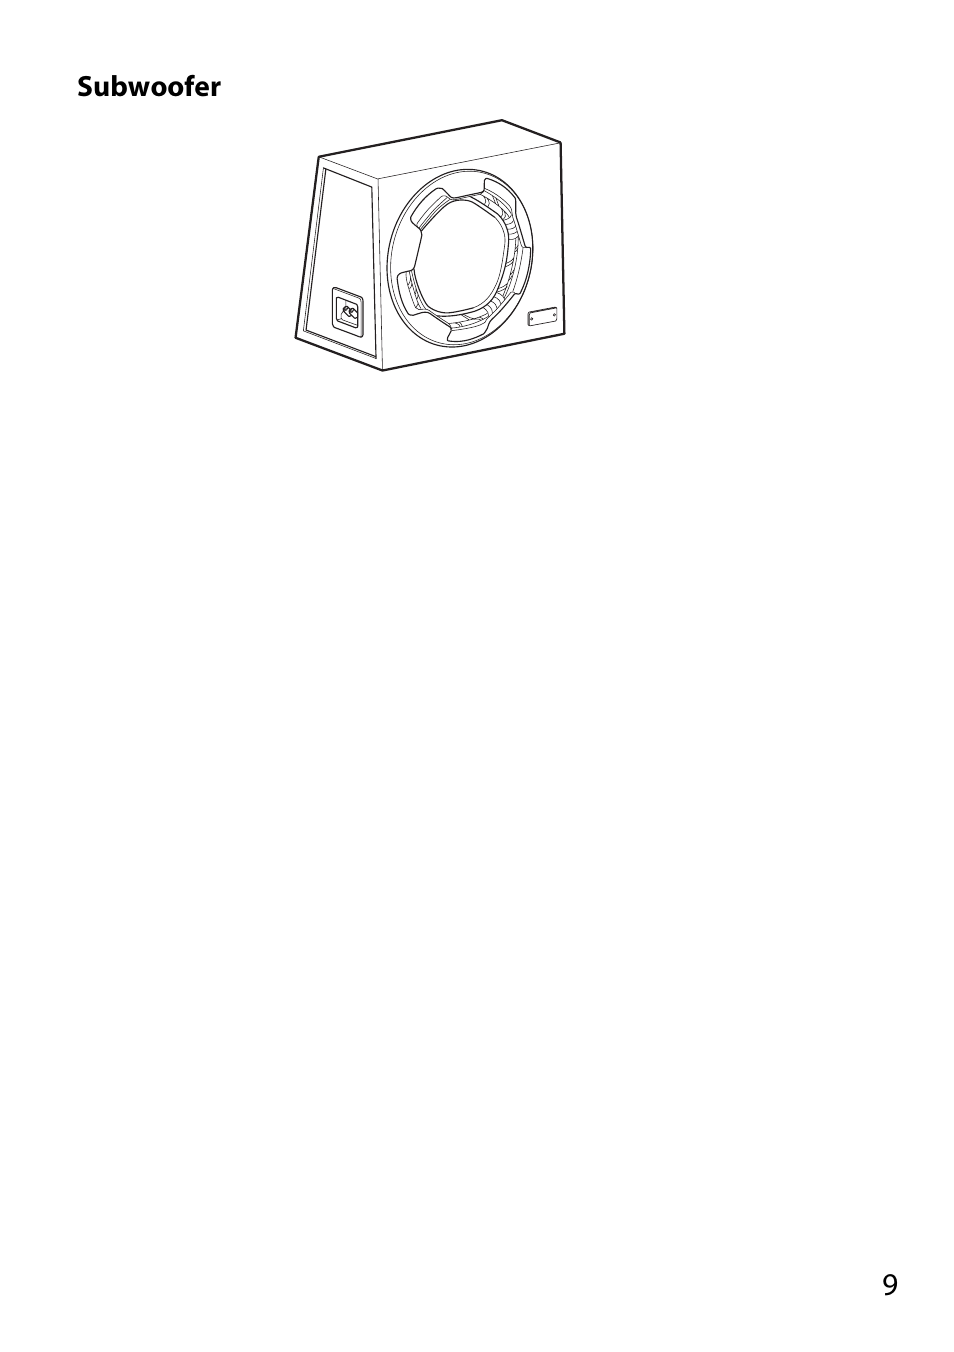 Subwoofer | Sony XDP-PK1000 User Manual | Page 9 / 52